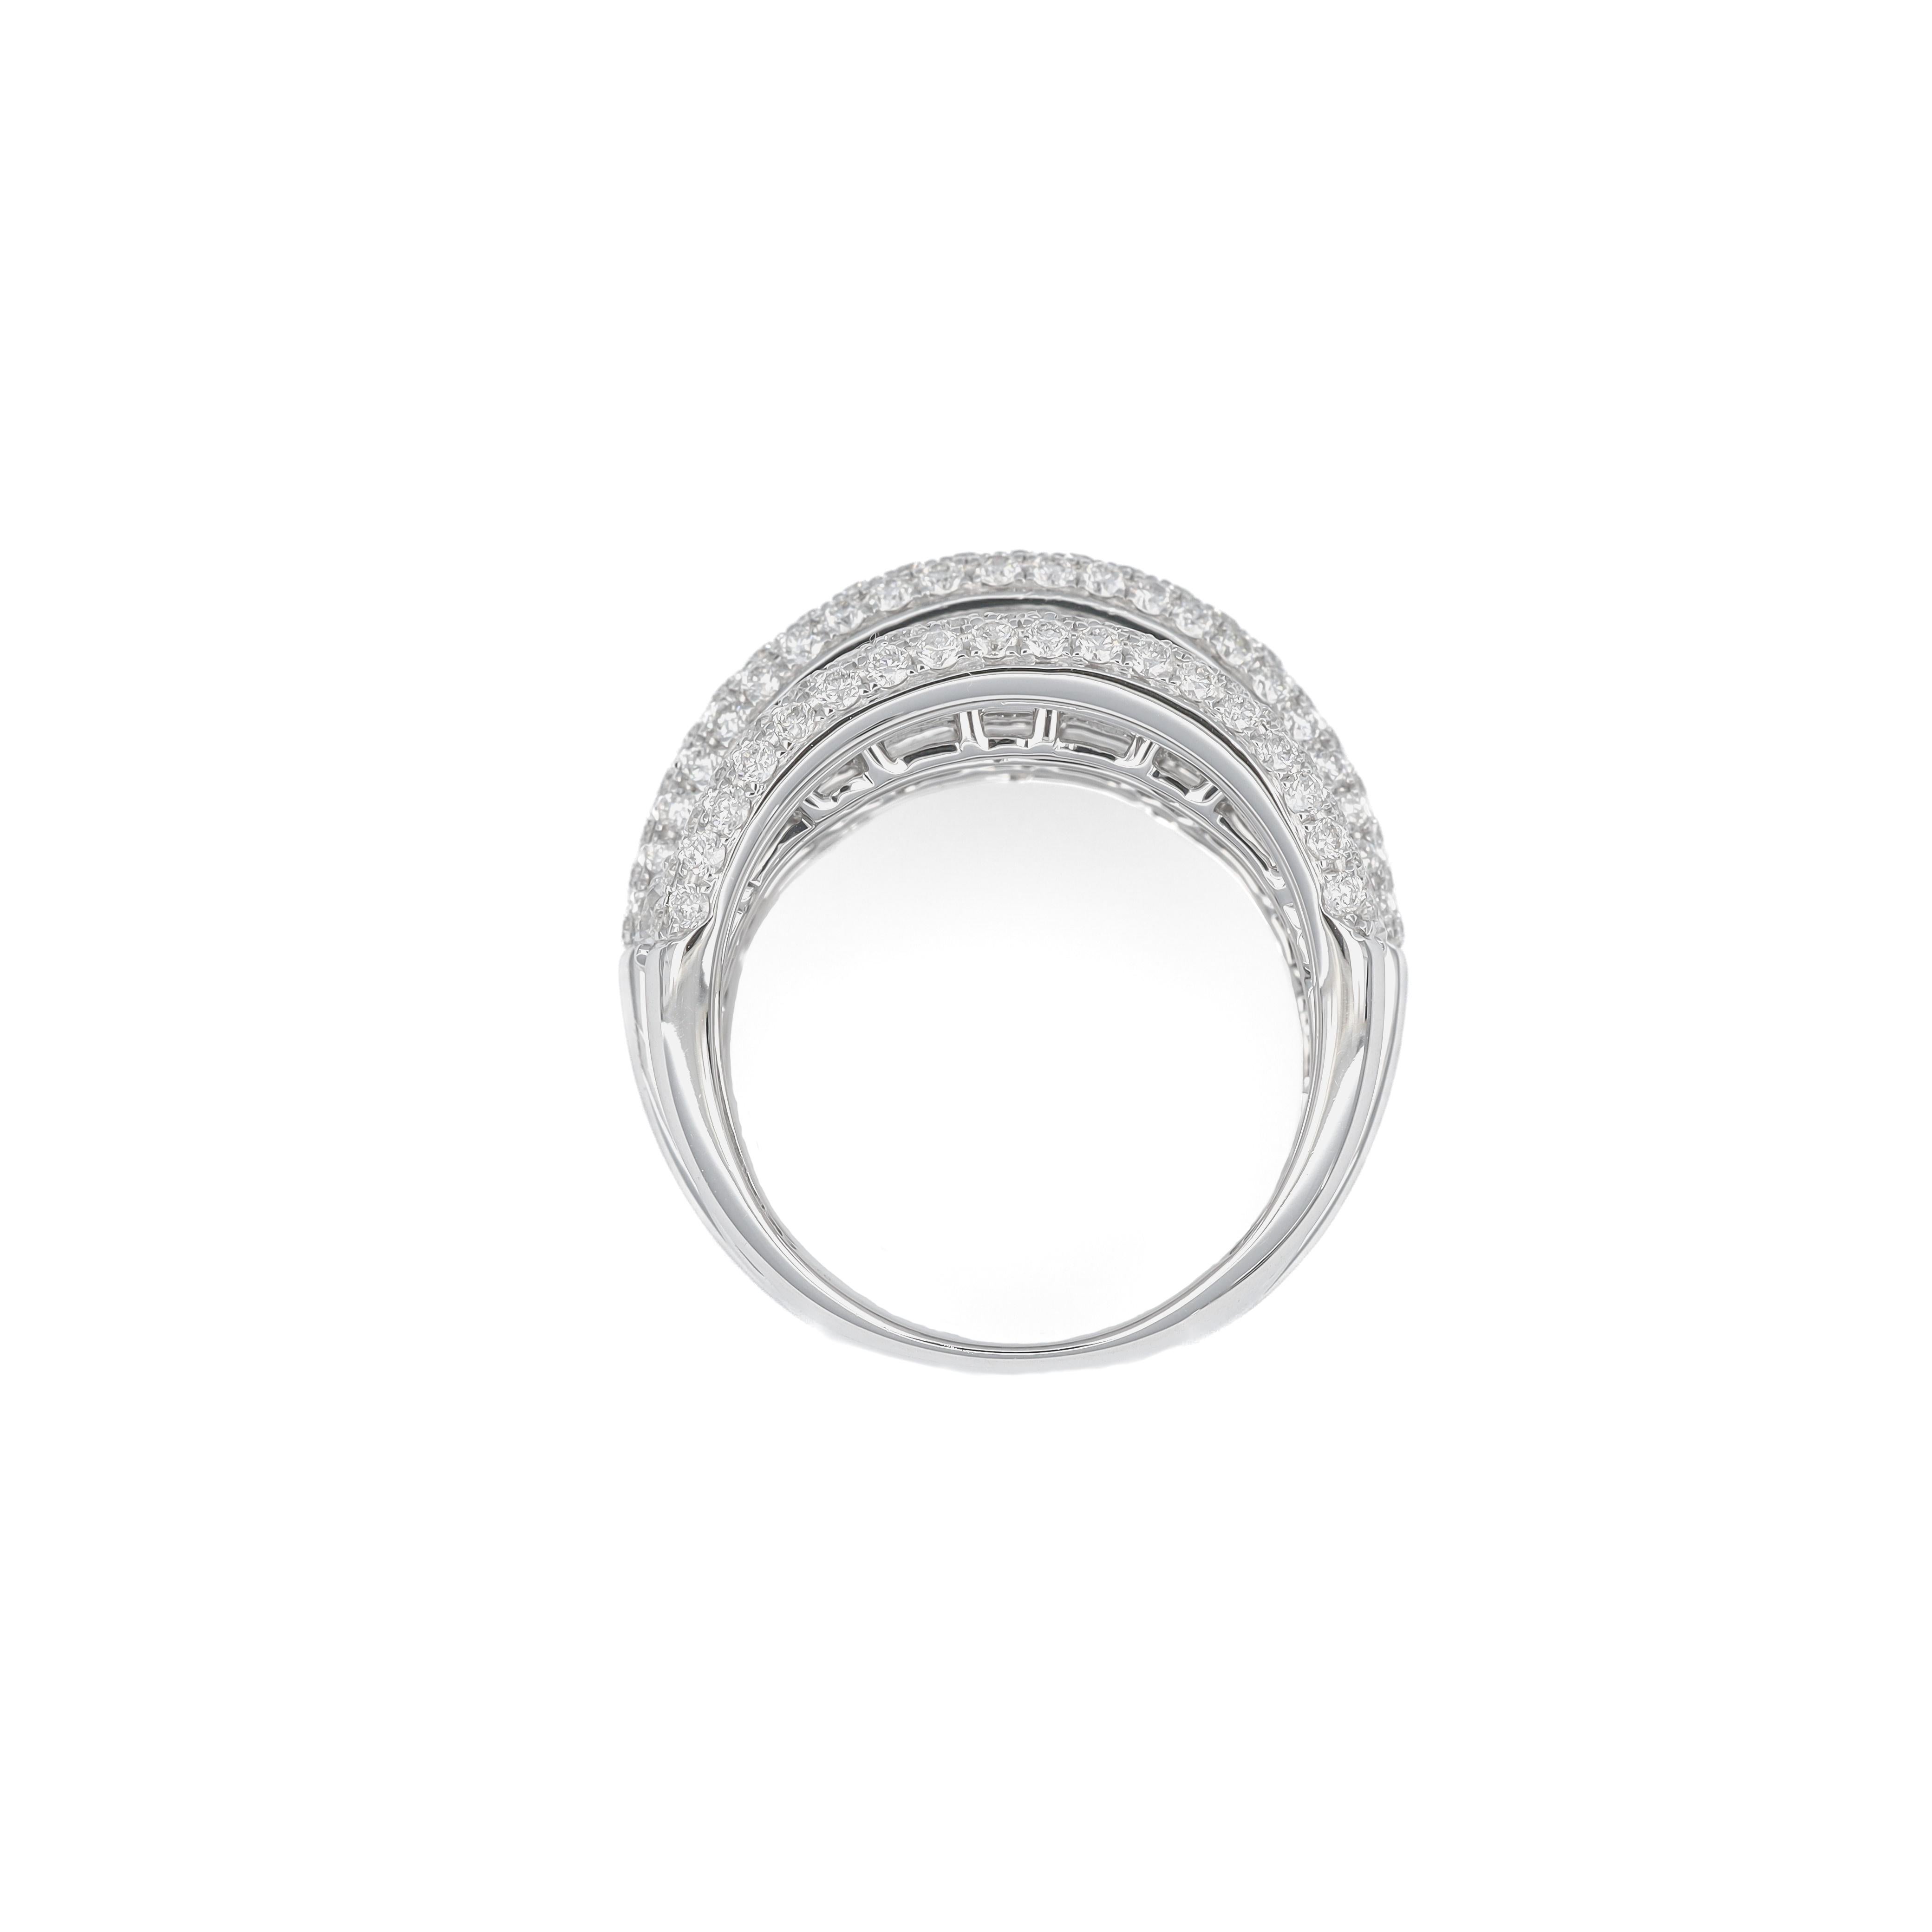 Behold the epitome of elegance and sophistication captured in this extraordinary white gold ring. A masterpiece born from the ingenuity of jewelry design, it stands as a testament to the pinnacle of craftsmanship and artistic finesse.

Crafted